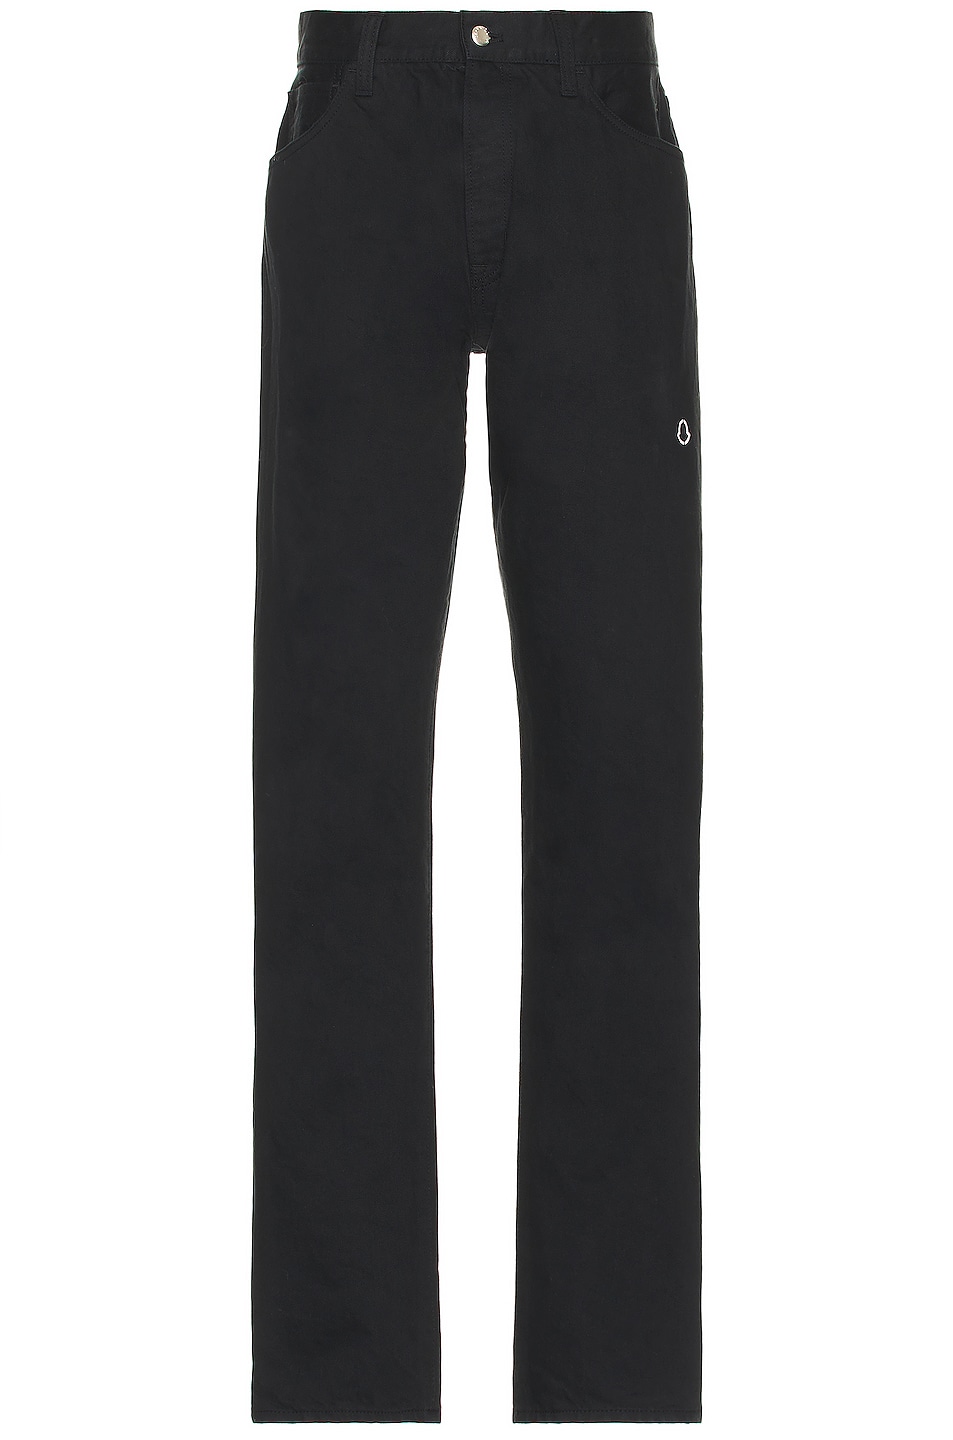 Image 1 of Moncler Genius x Fragment Trousers in Black